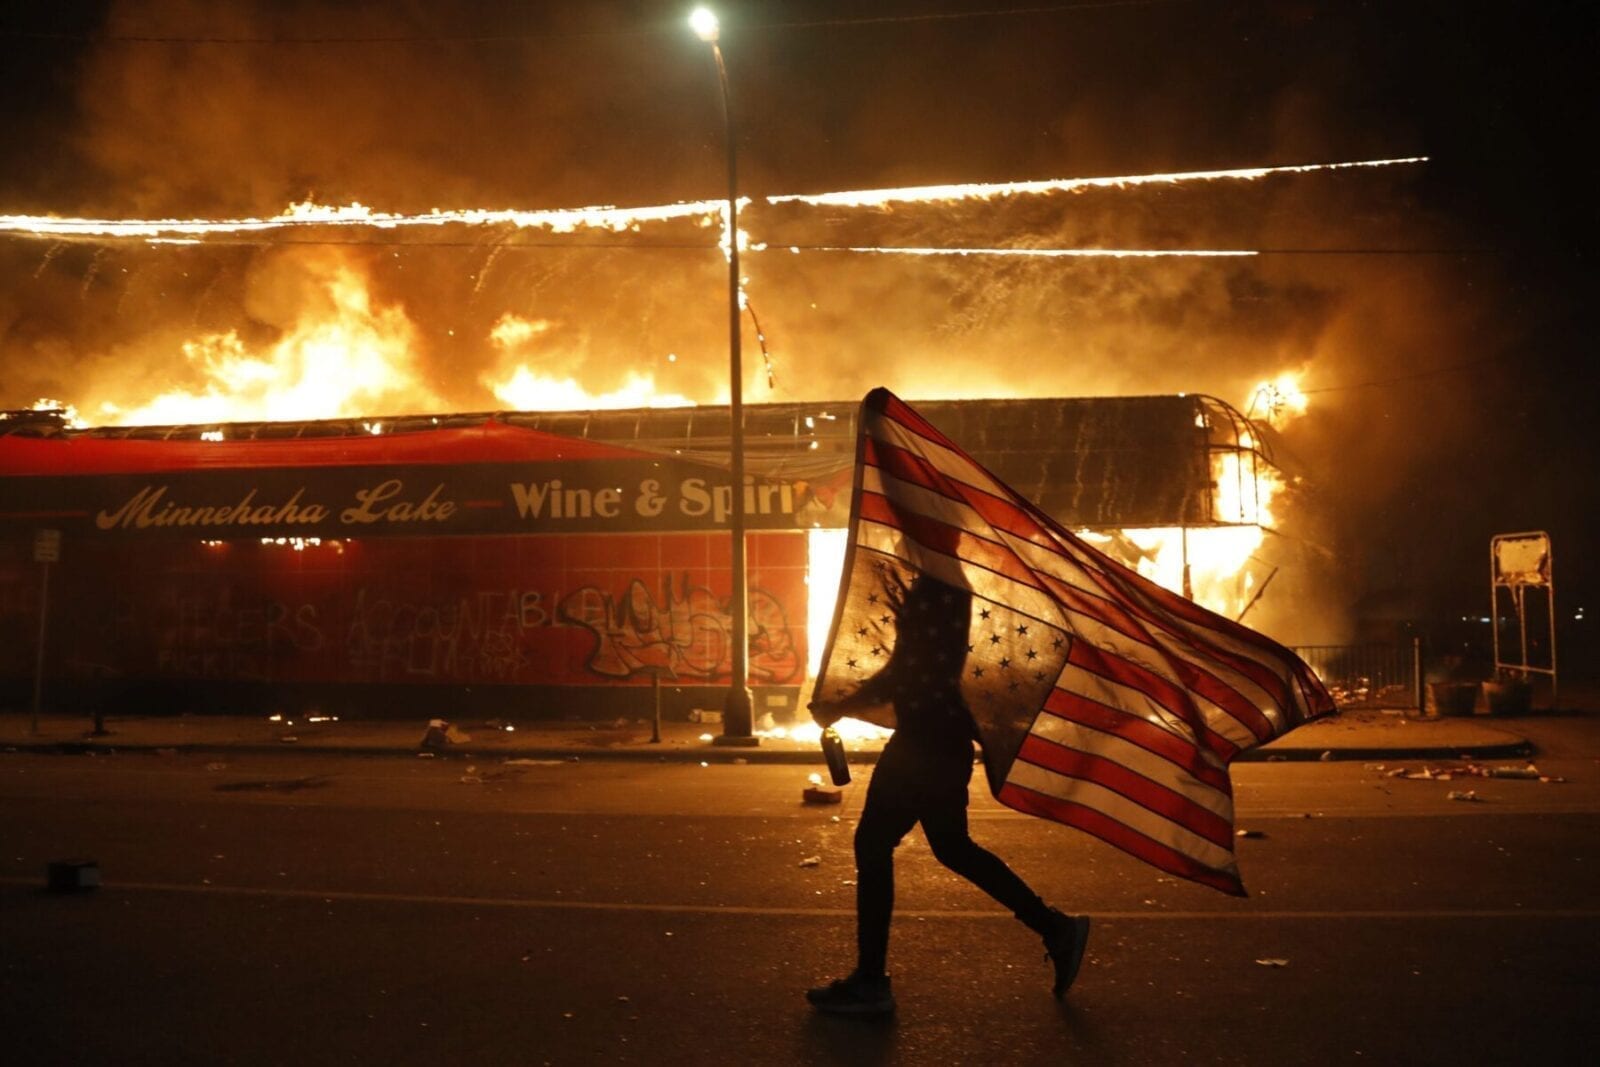 A protester carries a U.S. flag upside down, a sign of distress, next to a burning building Thursday, May 28, 2020, in Minneapolis. Protests over the death of George Floyd, a Black man who died in police custody on May 25, broke out in Minneapolis for a third straight night. (AP Photo/Julio Cortez)